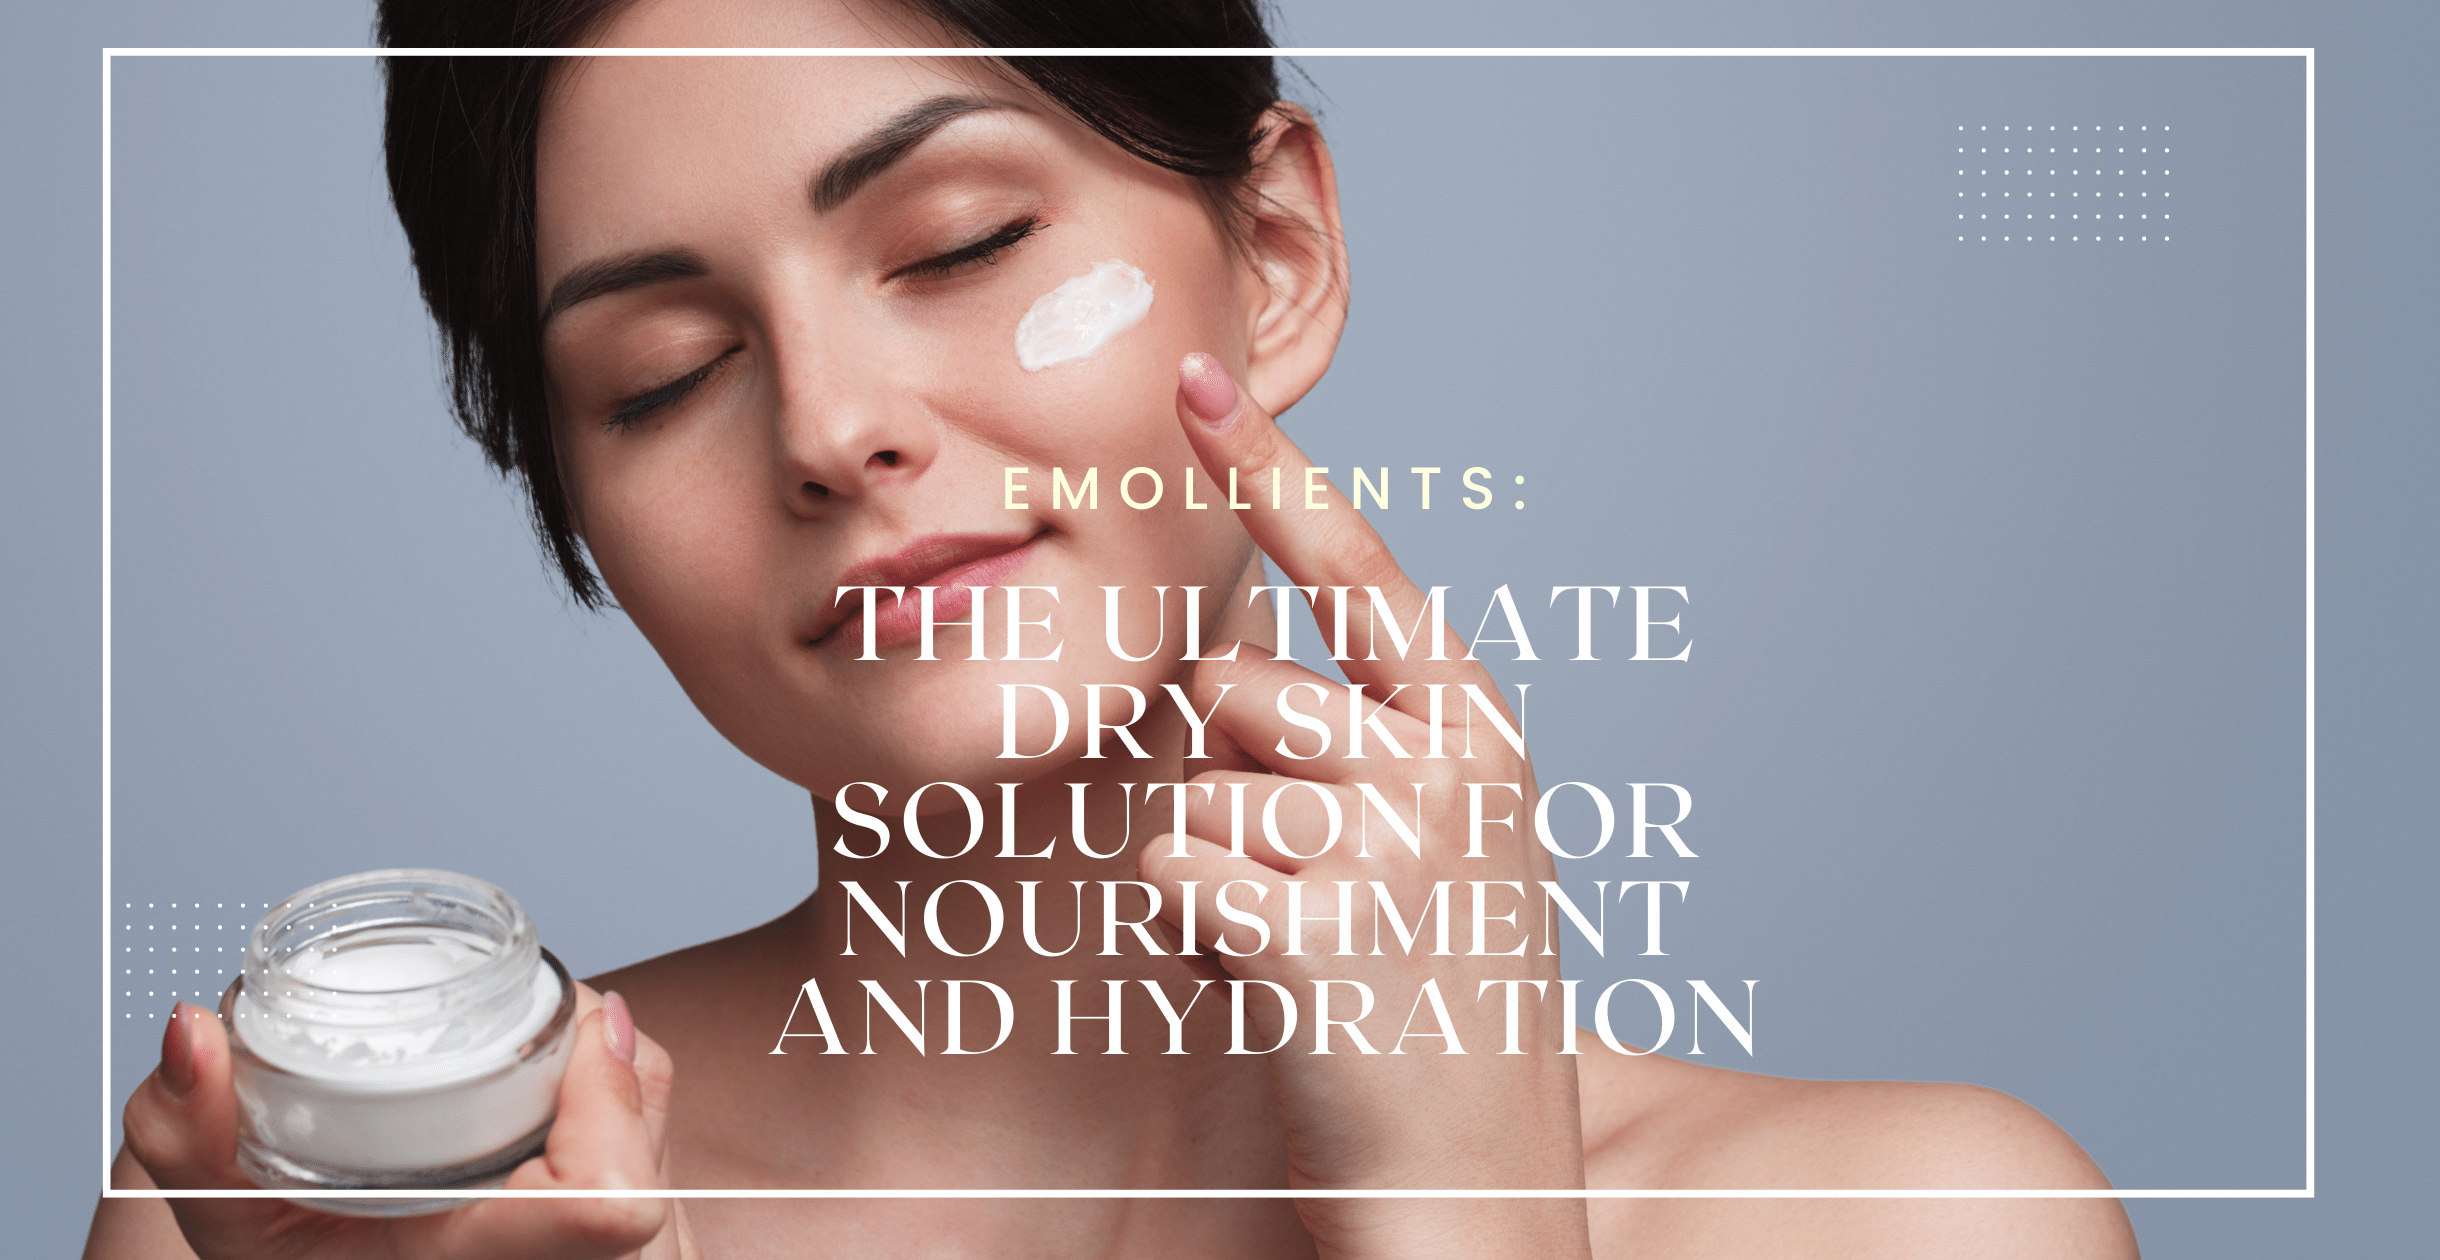 Emollients: The Ultimate Dry Skin Solution for Nourishment and Hydration